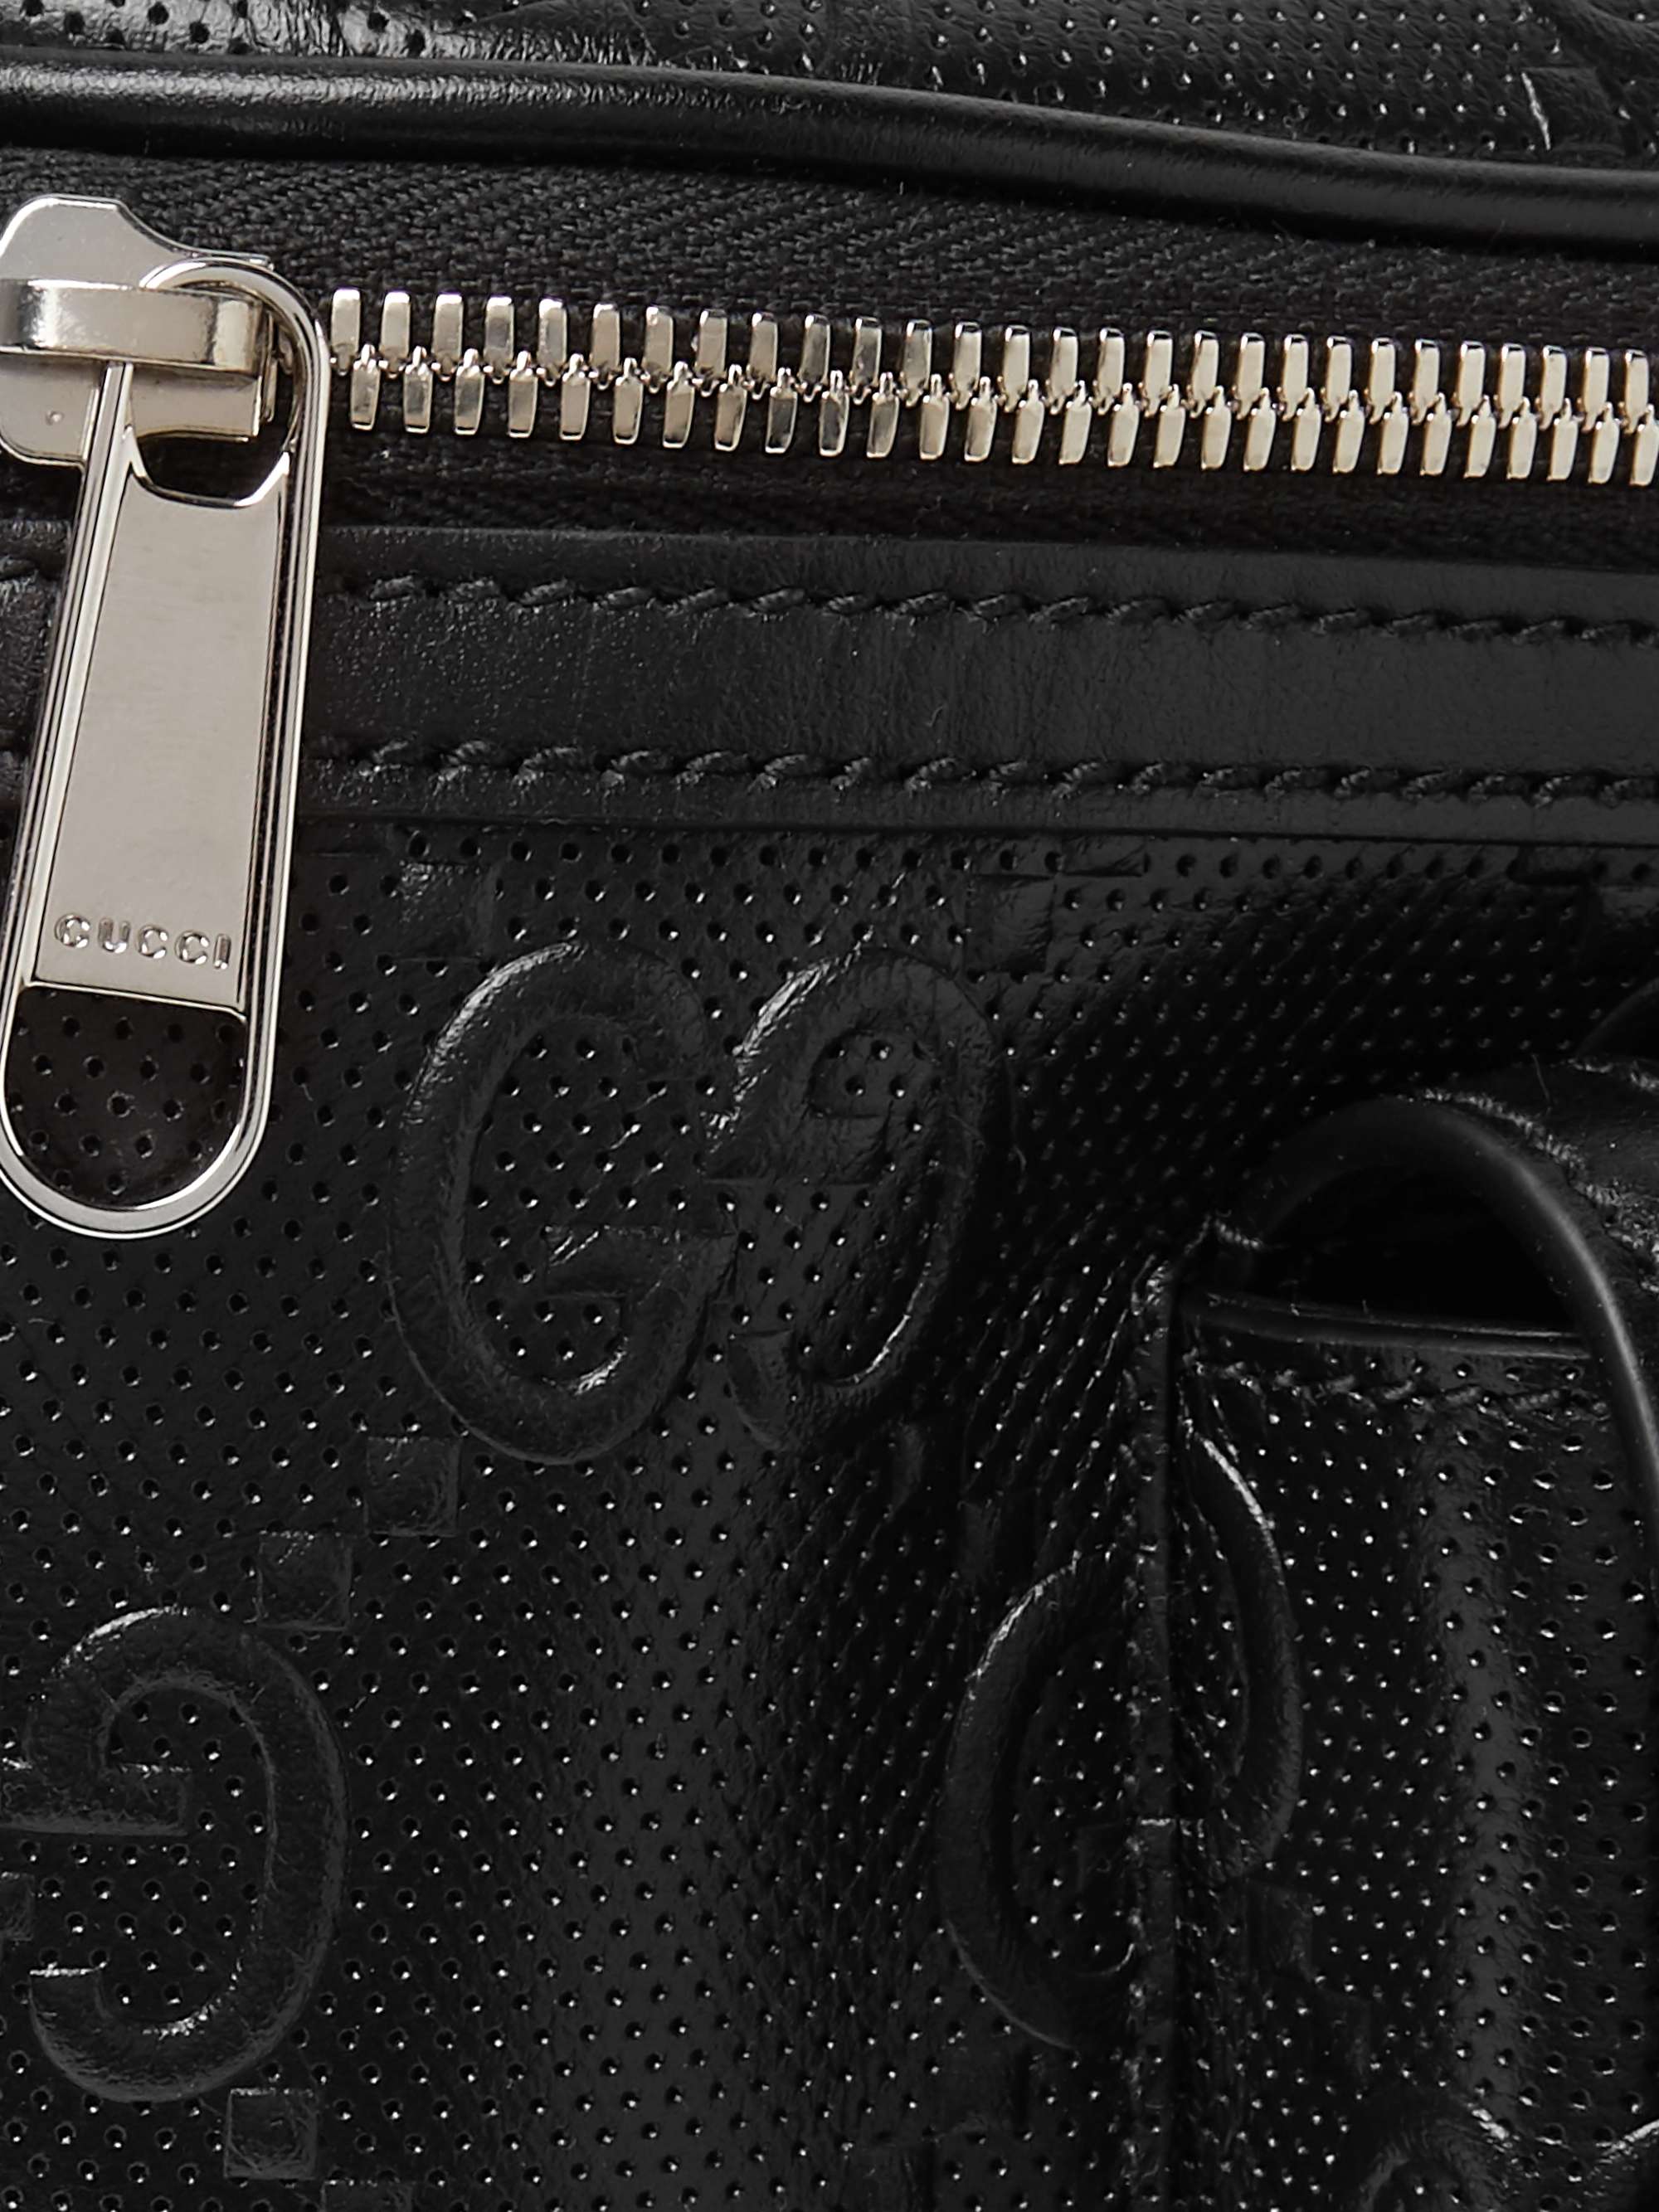 GUCCI Logo-Embossed Perforated Leather Belt Bag